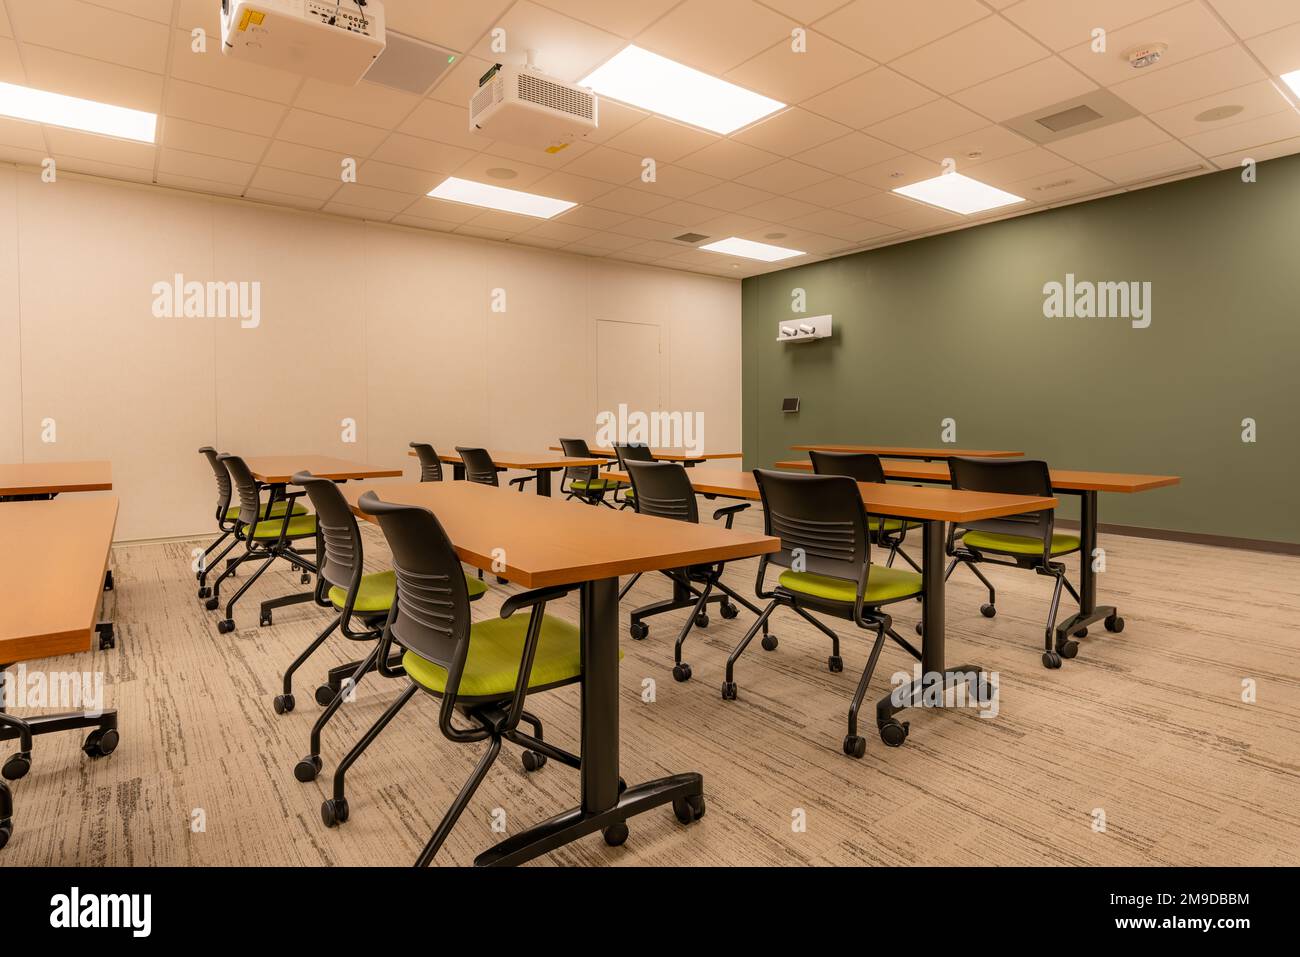 Interior of an office training, meeting, conference room with ...